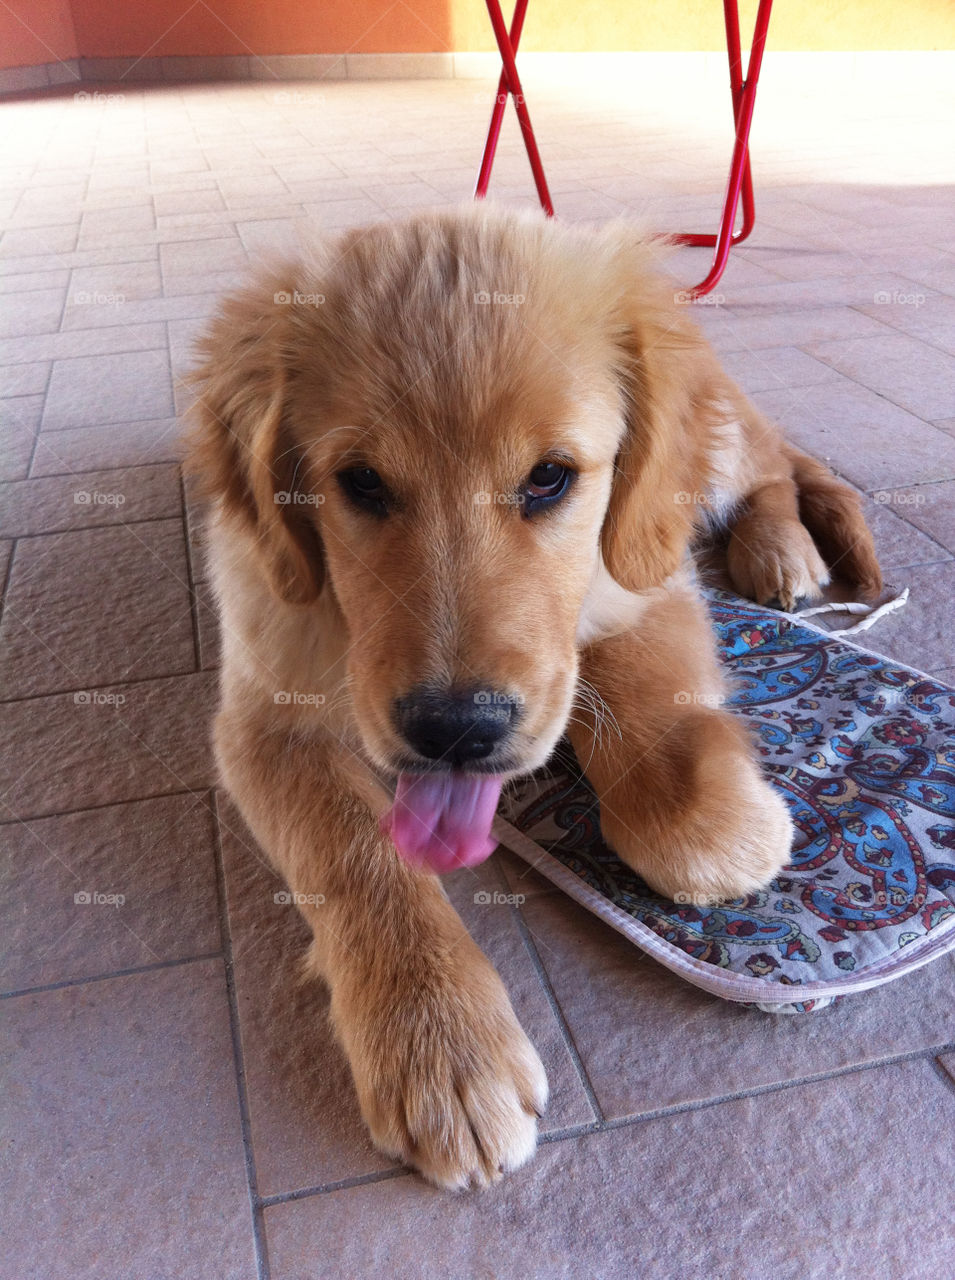 Dog, golden retriever, puppy, cute, pet, adorable, sweet, young, tongue, happy, 